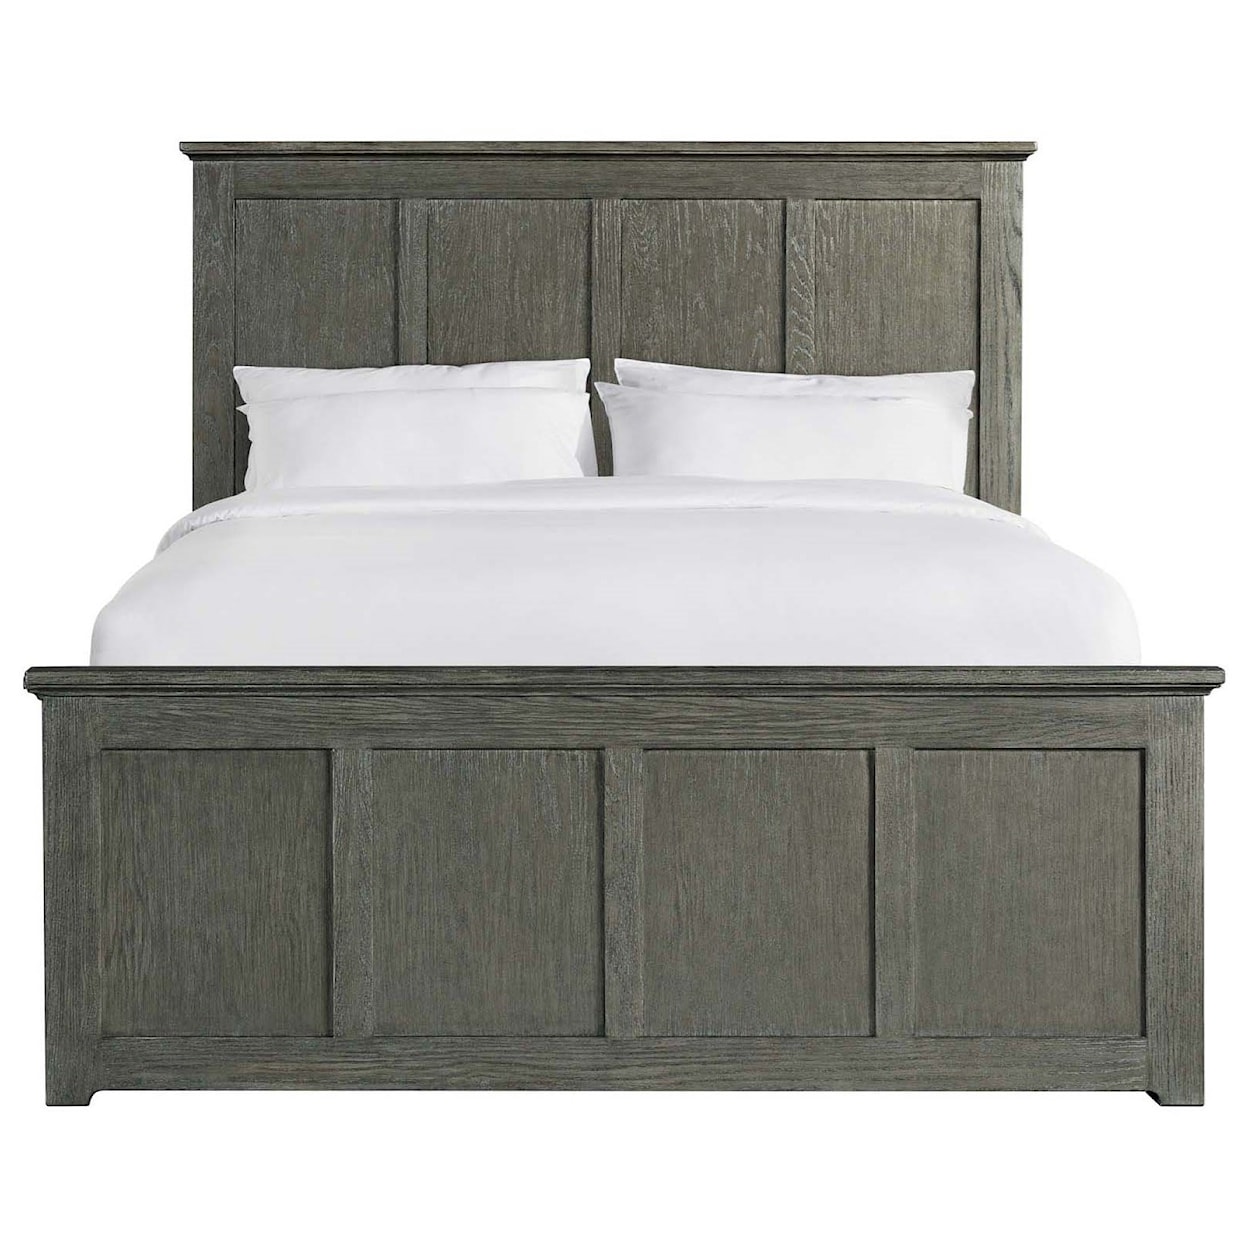 Intercon Oak Park Queen Panel Bed with 12 Storage Drawers